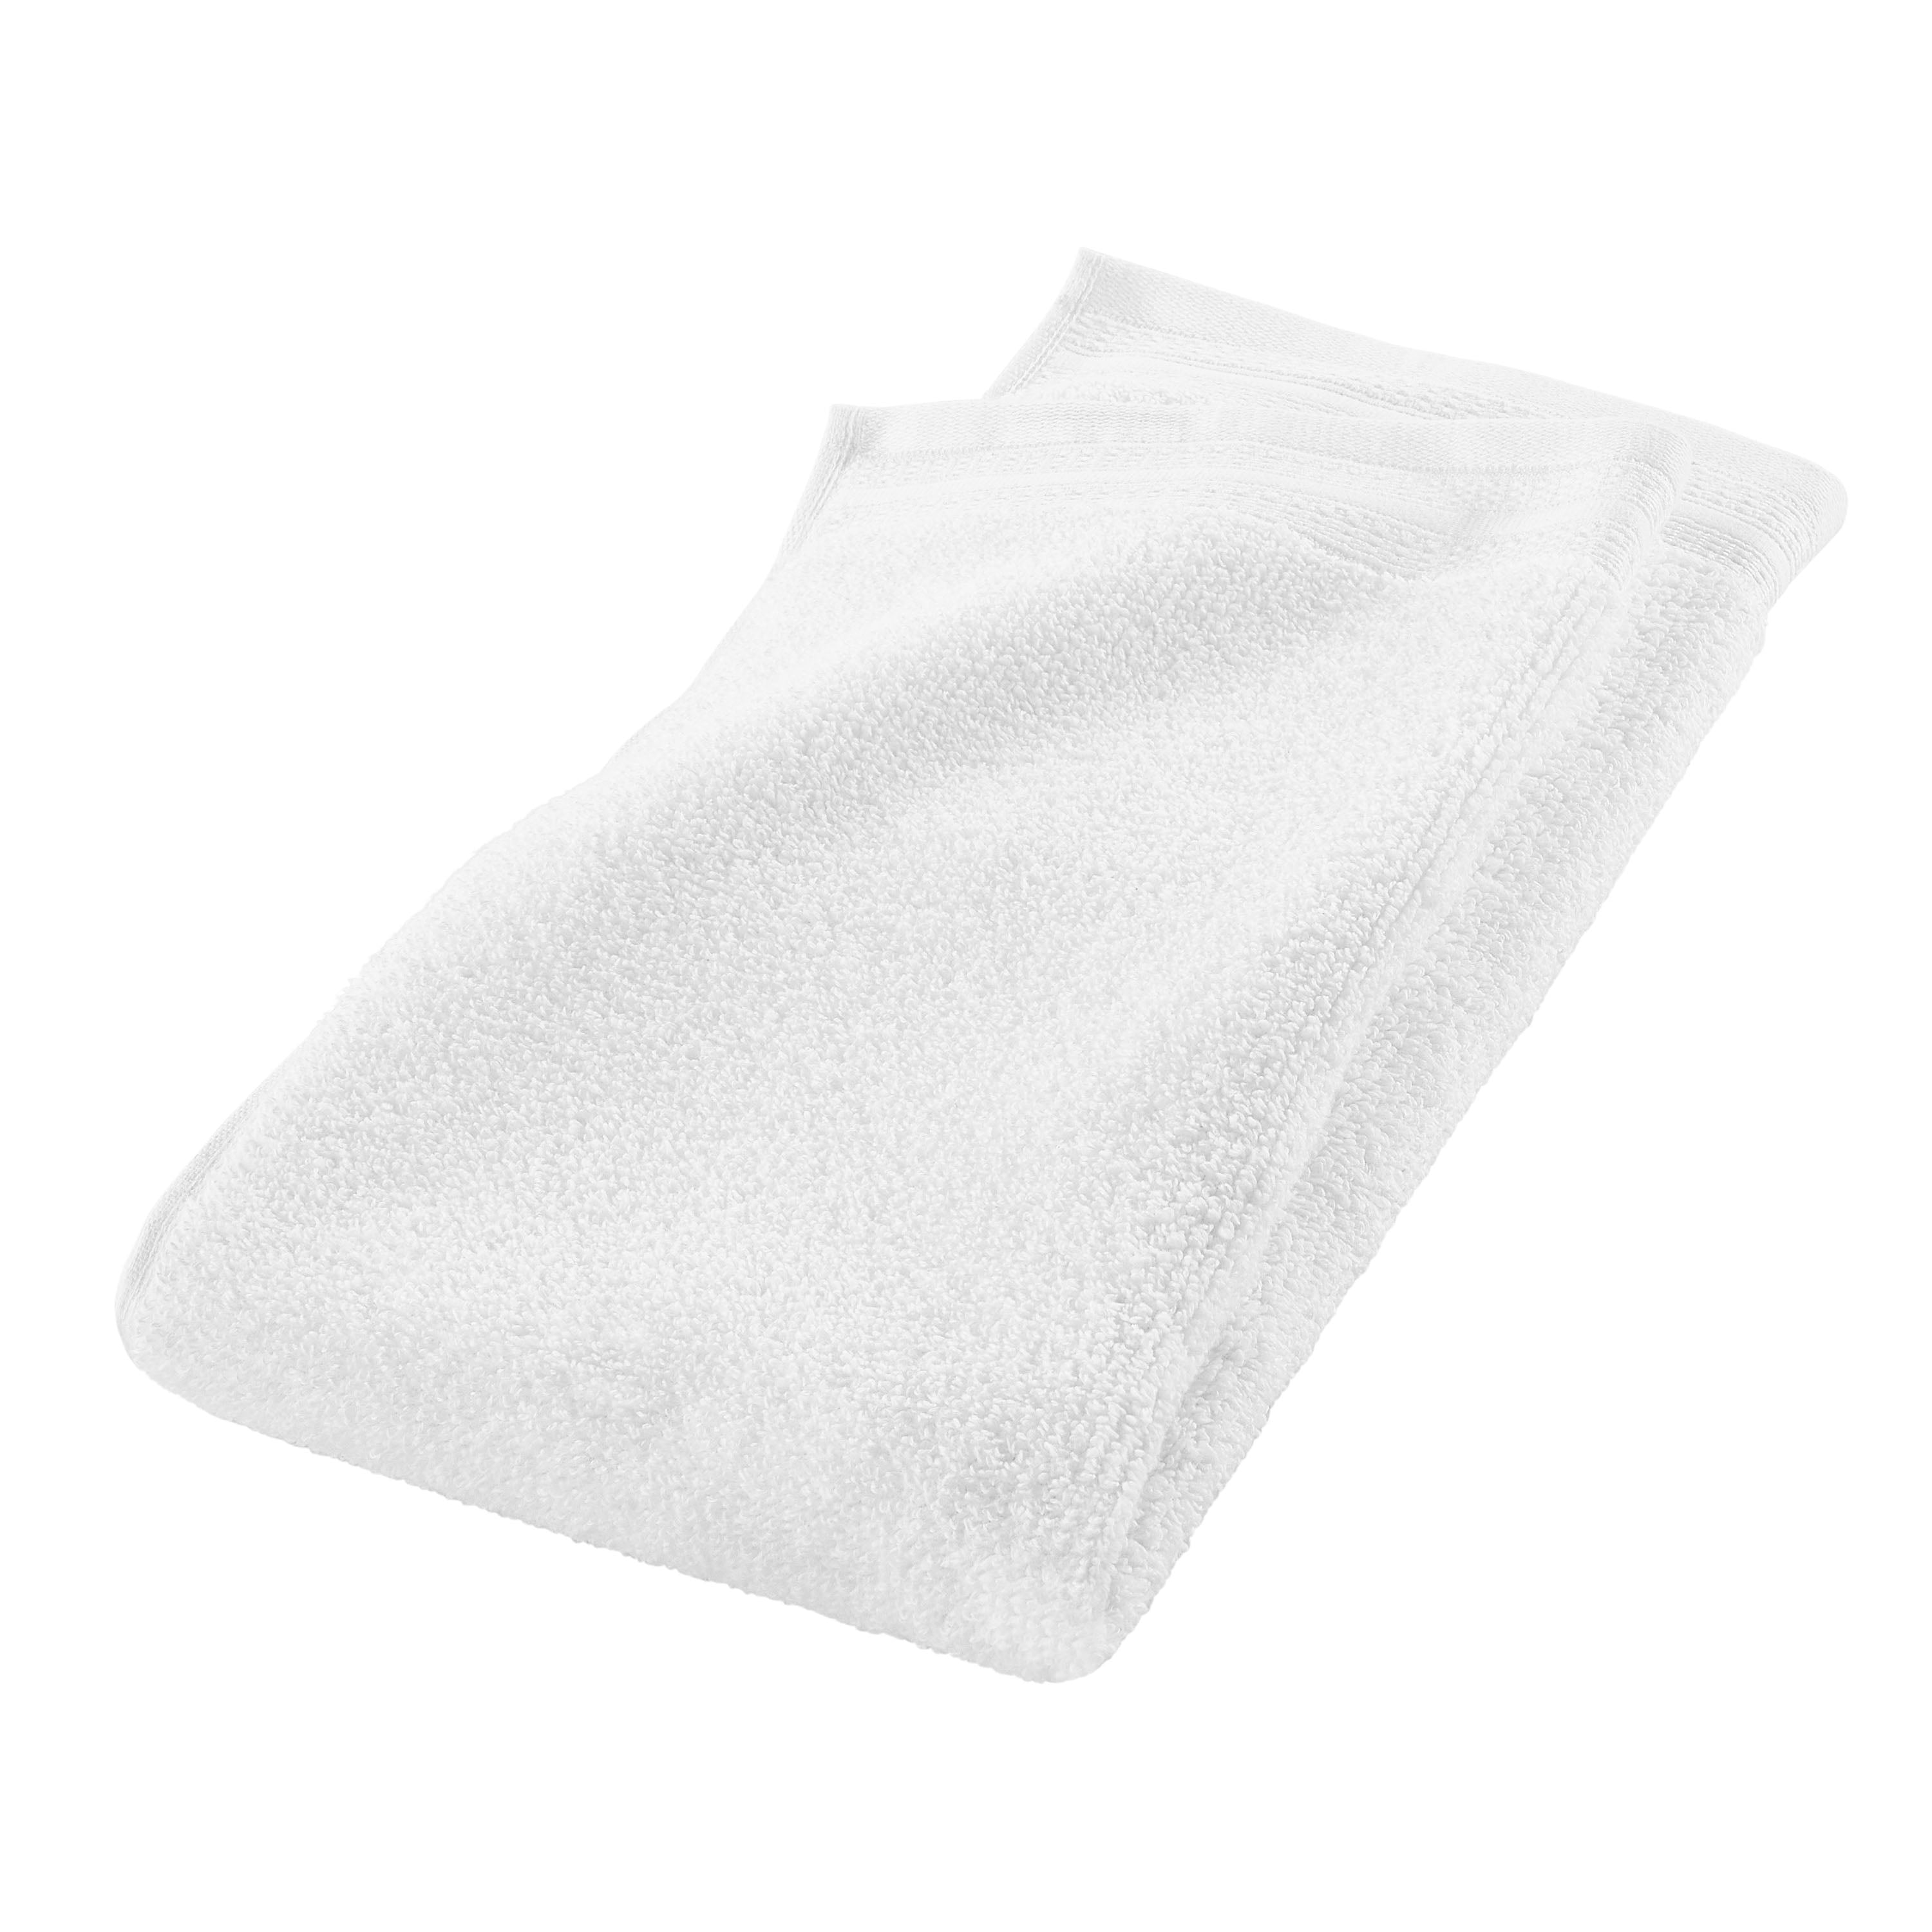 LE Bath Towel, Hand Towel, & Body/Face Pack (pack of 3), marine